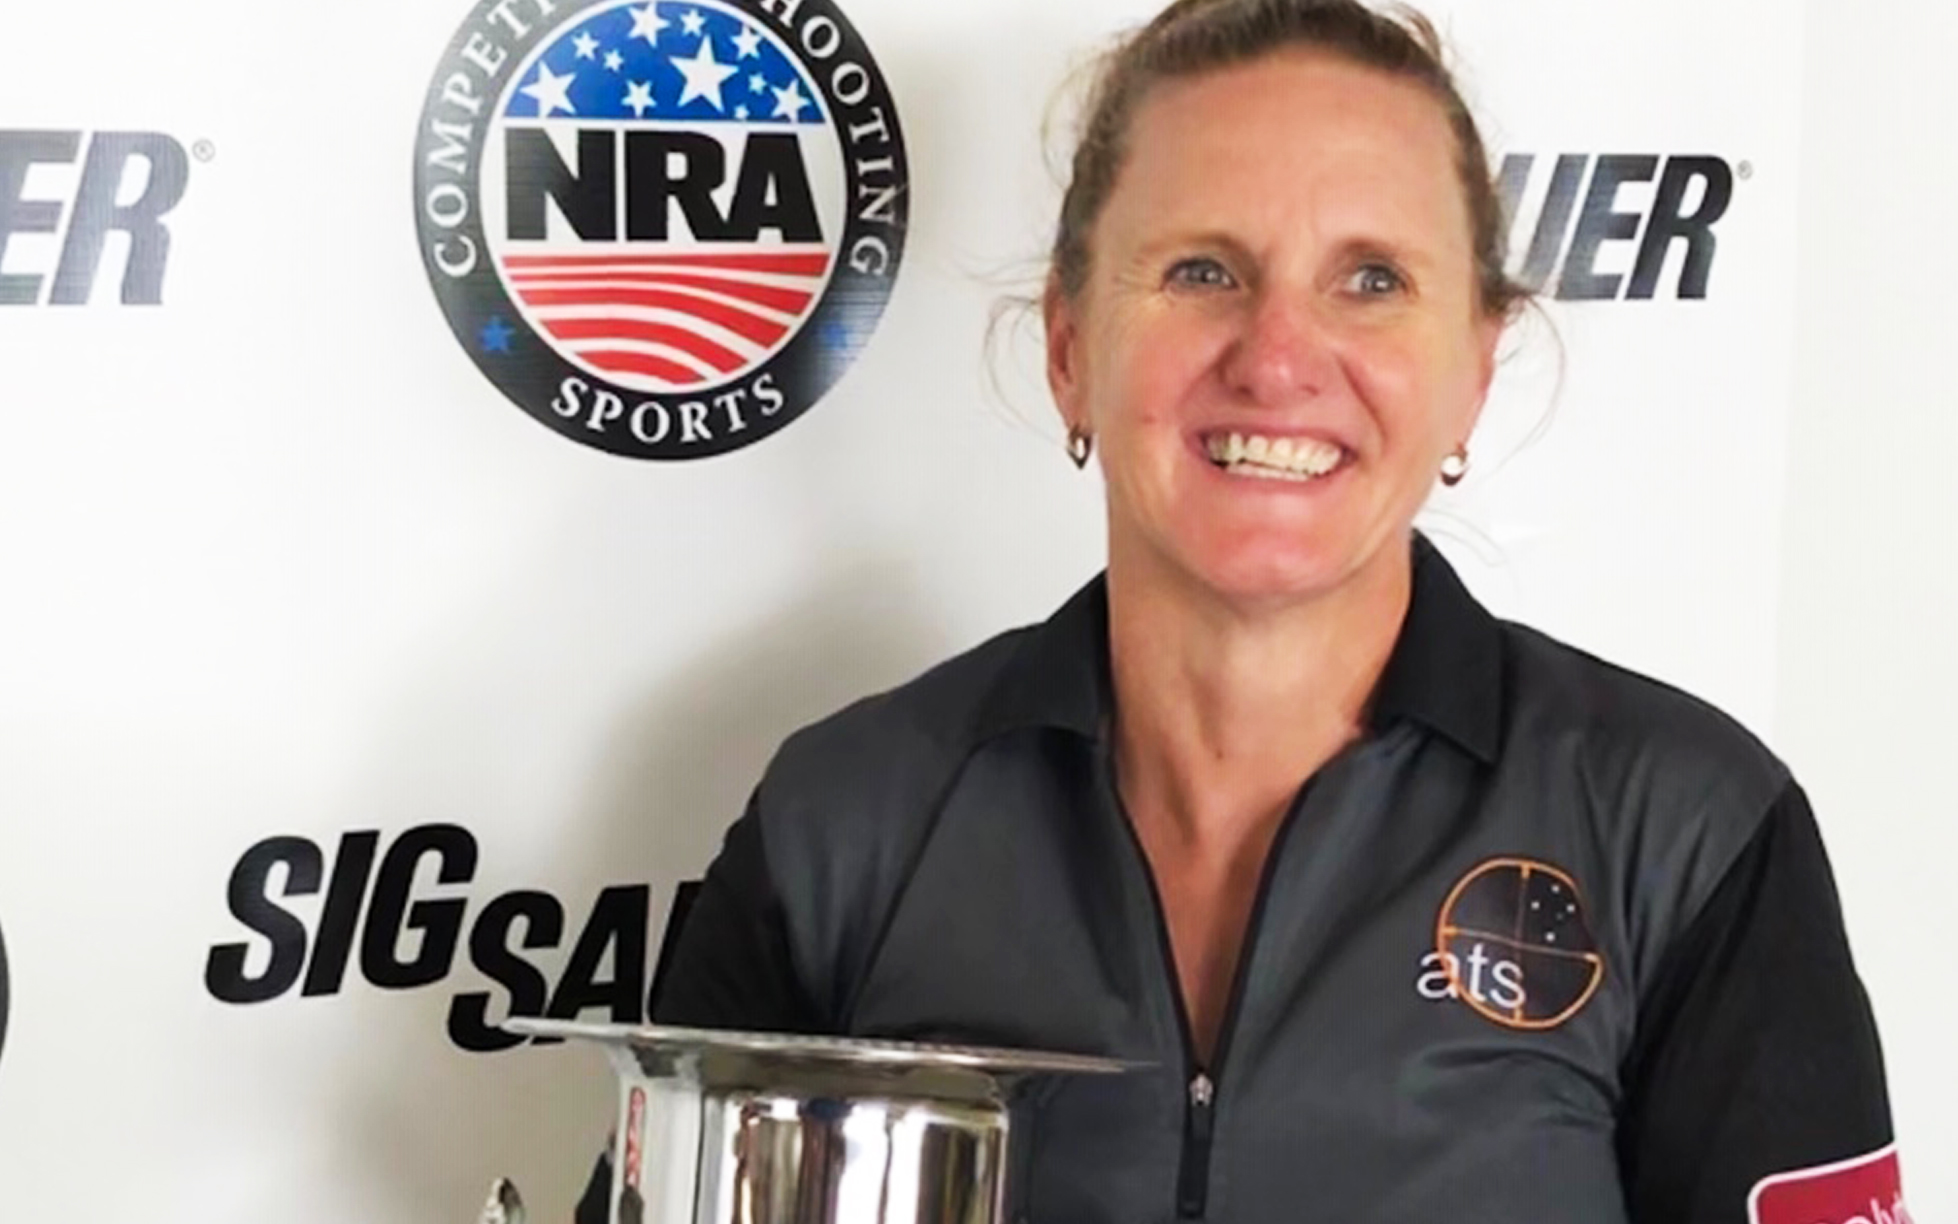 Ats Sponsored Action Pistol Shooters Mark And Cherie Blake